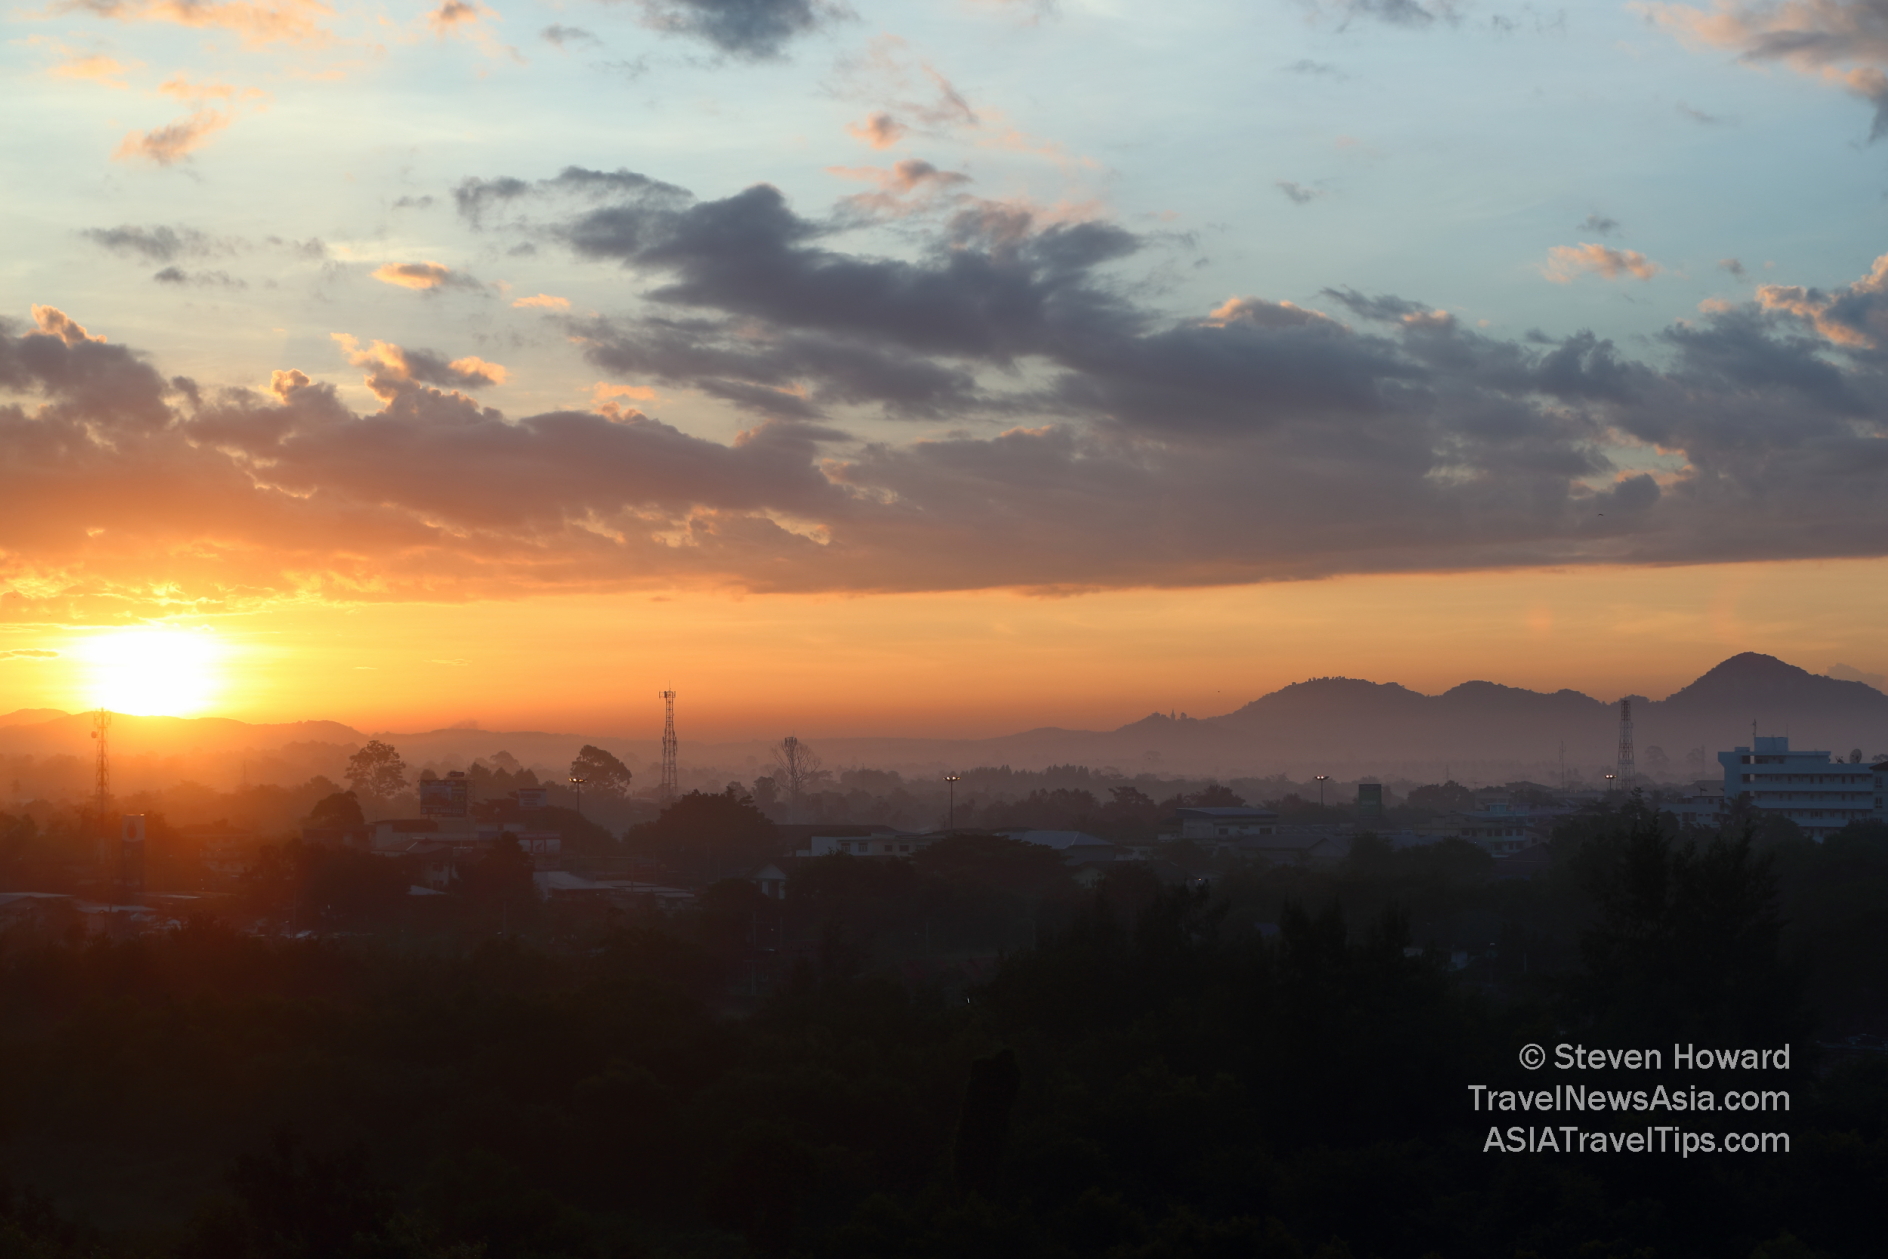 Sunrise in Chonburi, Thailand. Picture by Steven Howard of TravelNewsAsia.com Click to enlarge.